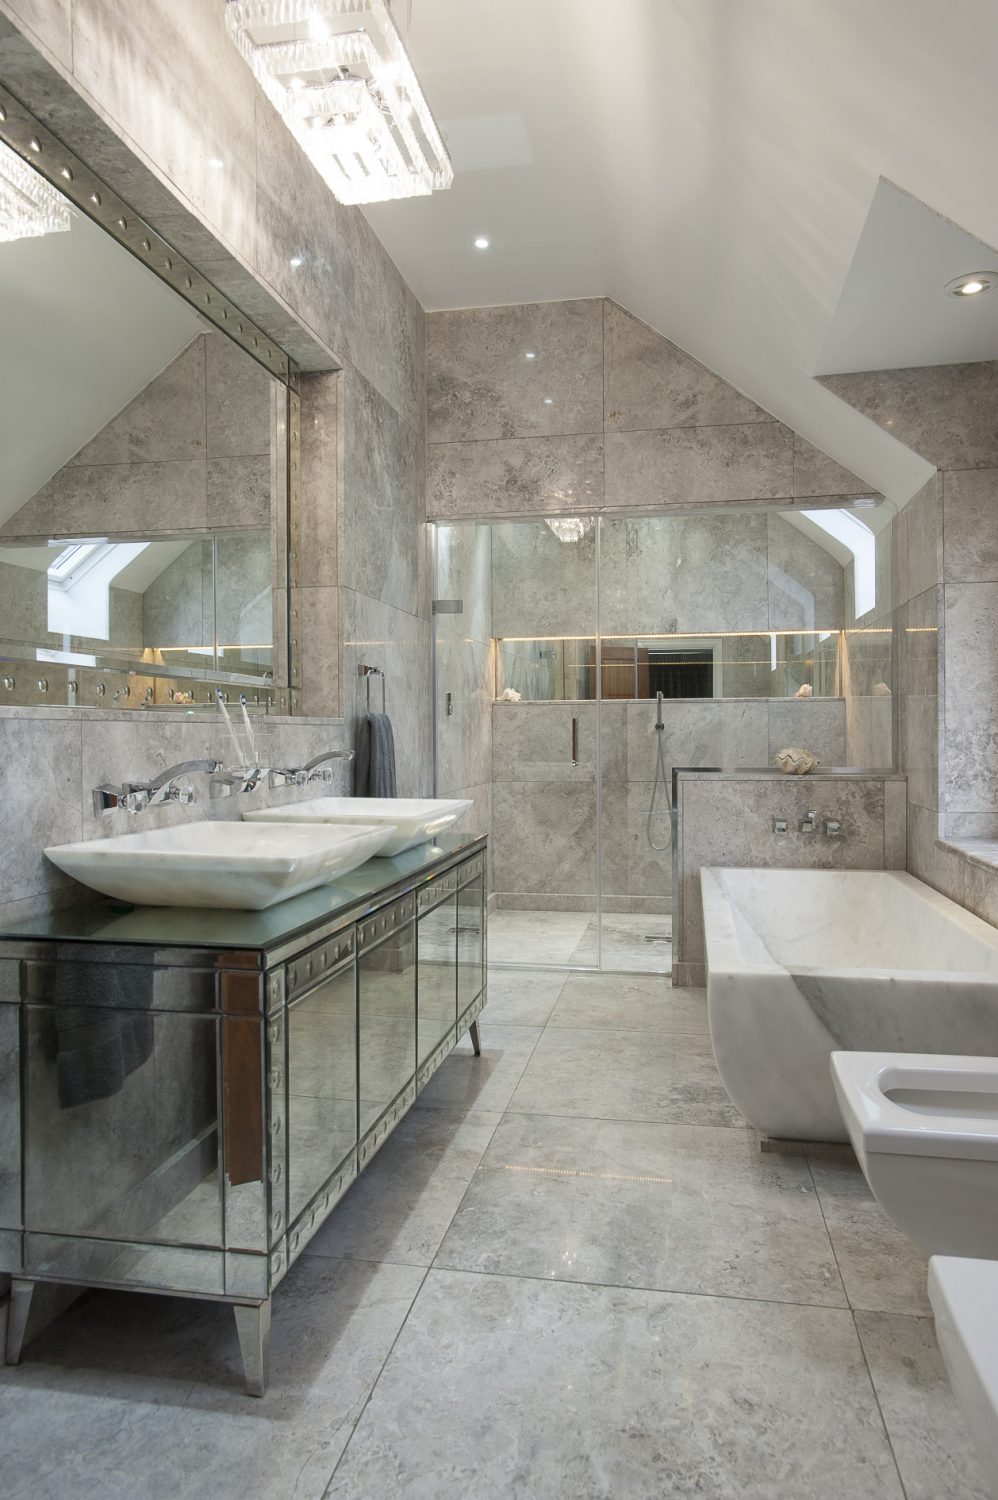 The bathroom with its part-vaulted ceiling is superb, its centrepiece a huge bath cut from a single block of Turkish marble...